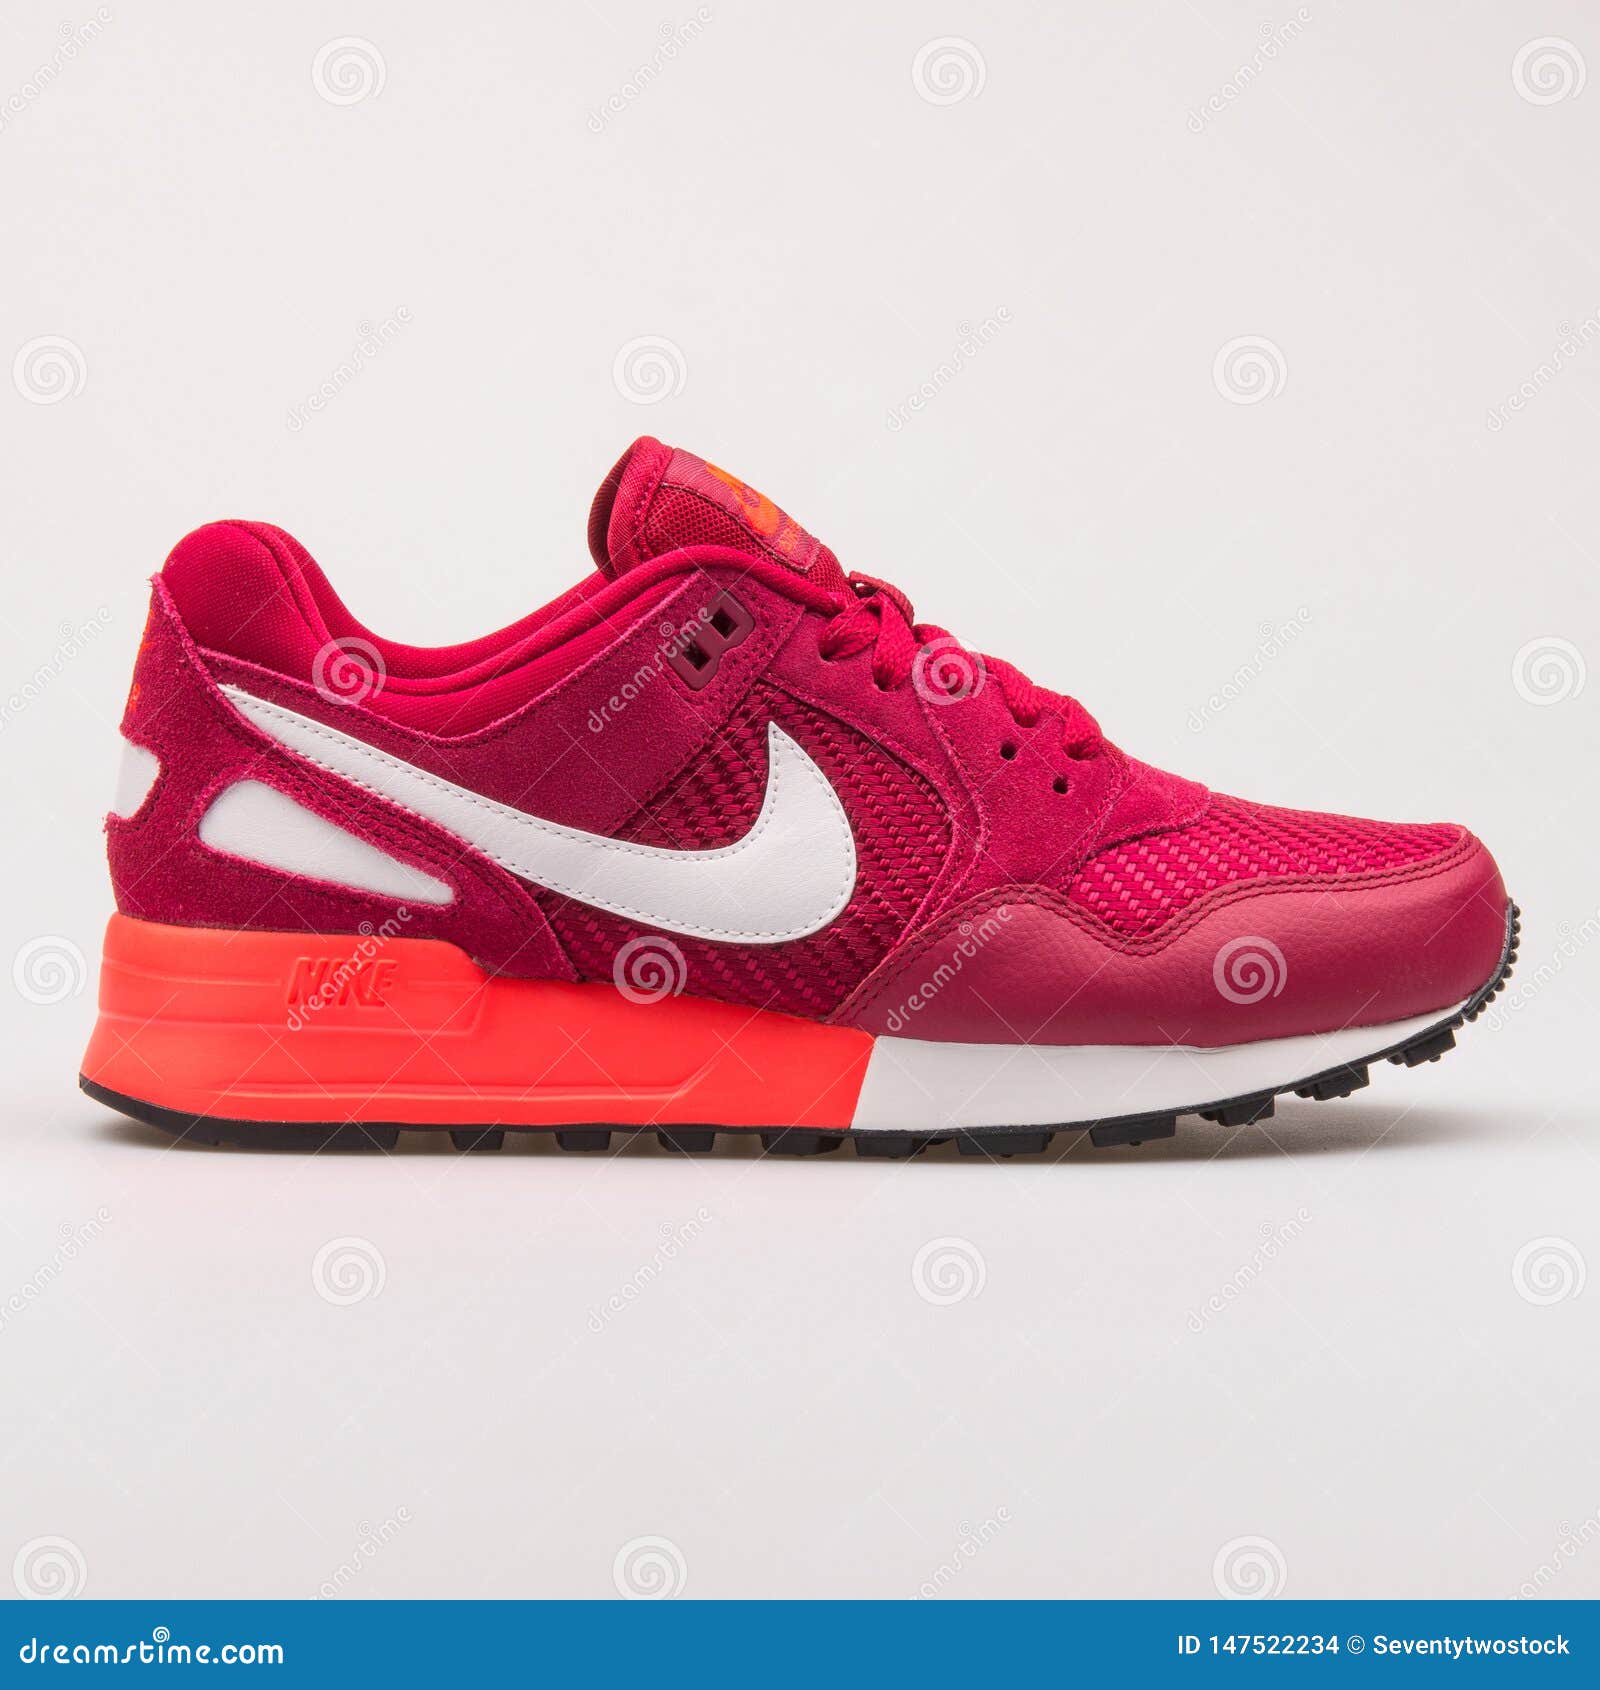 Air Pegasus 89 Red Sneaker Editorial Stock Image - Image of accessories, exercise: 147522234